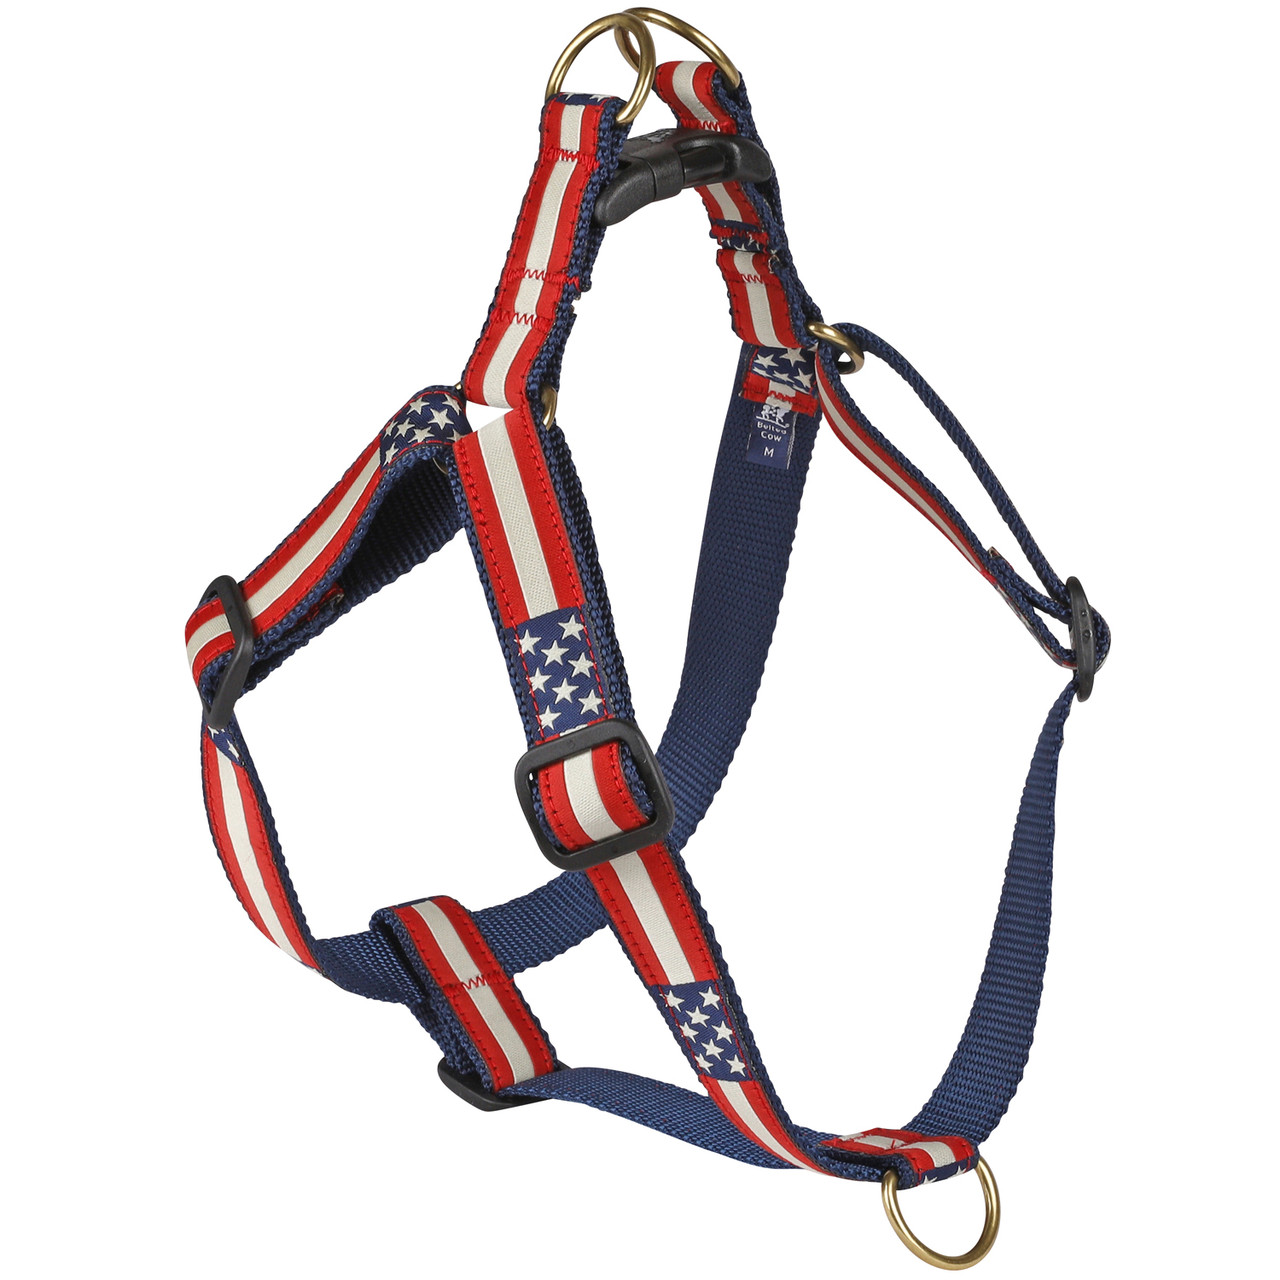 Retro US Flag Dog Harness 1 Inch by Belted Cow Company. Maine In Maine